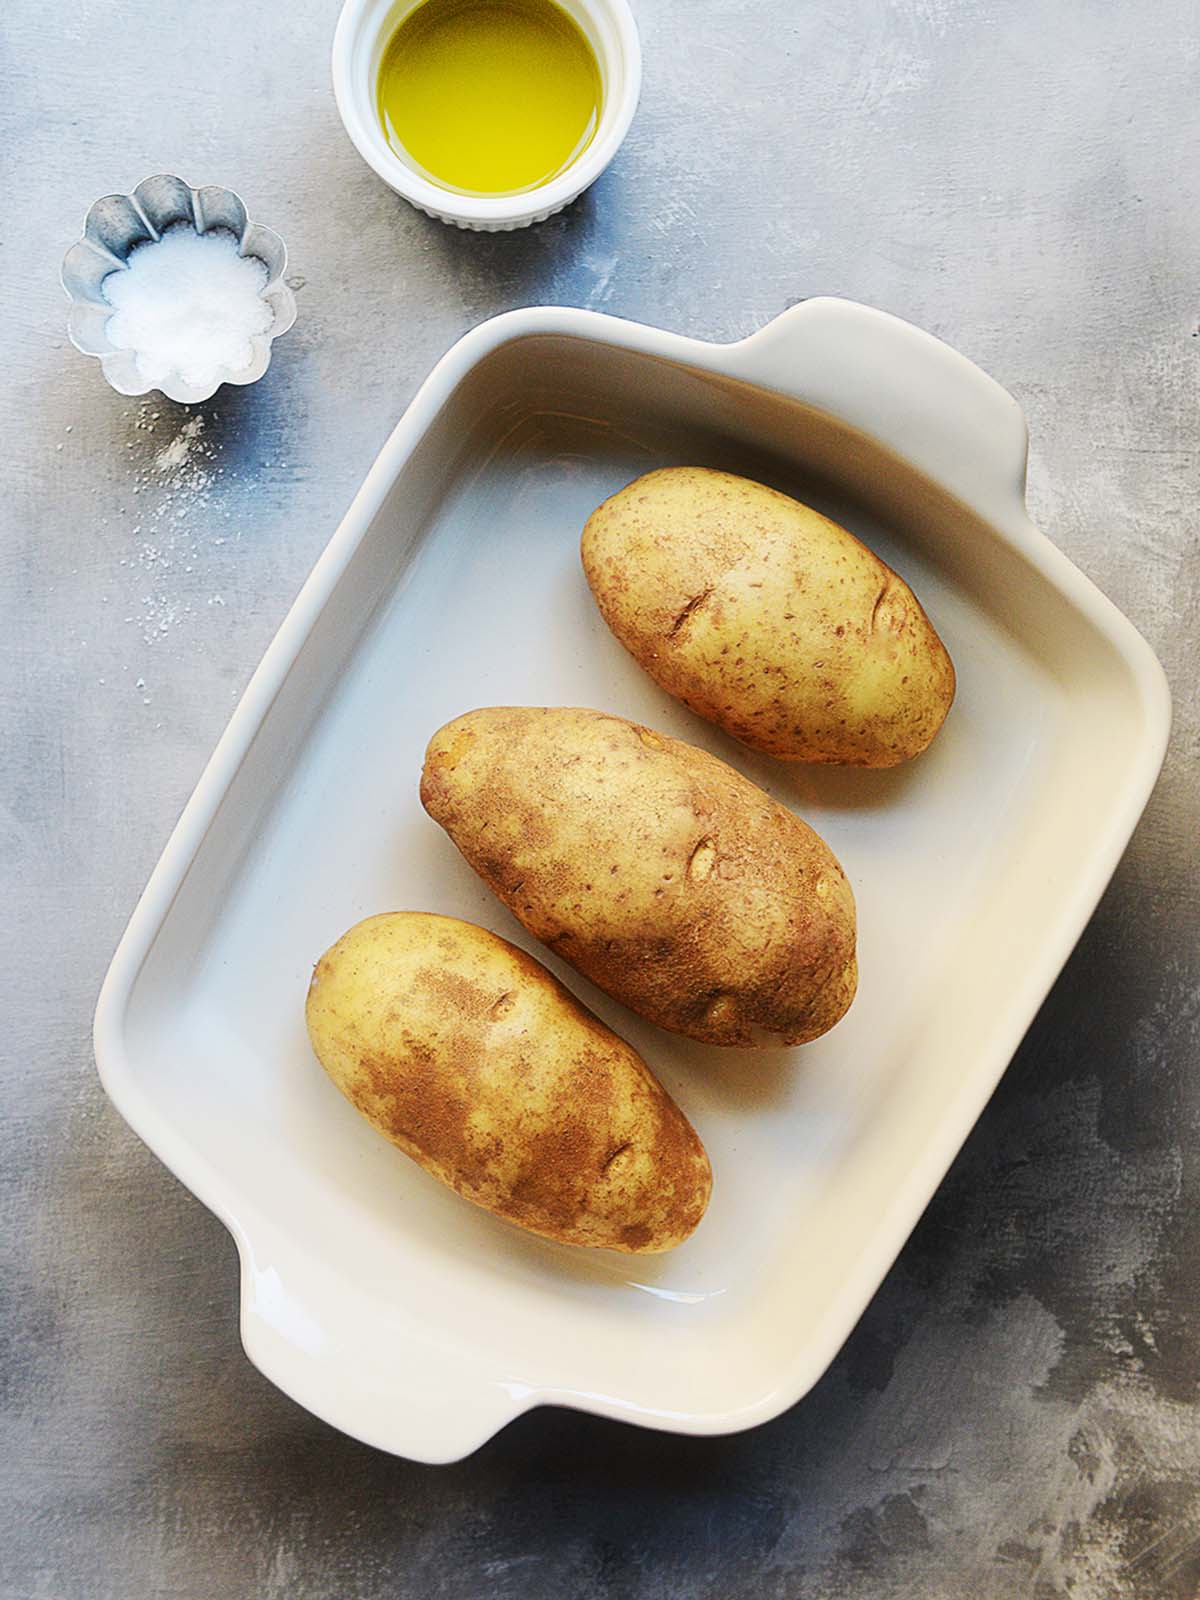 Three large russet potatoes placed in a baking tray.